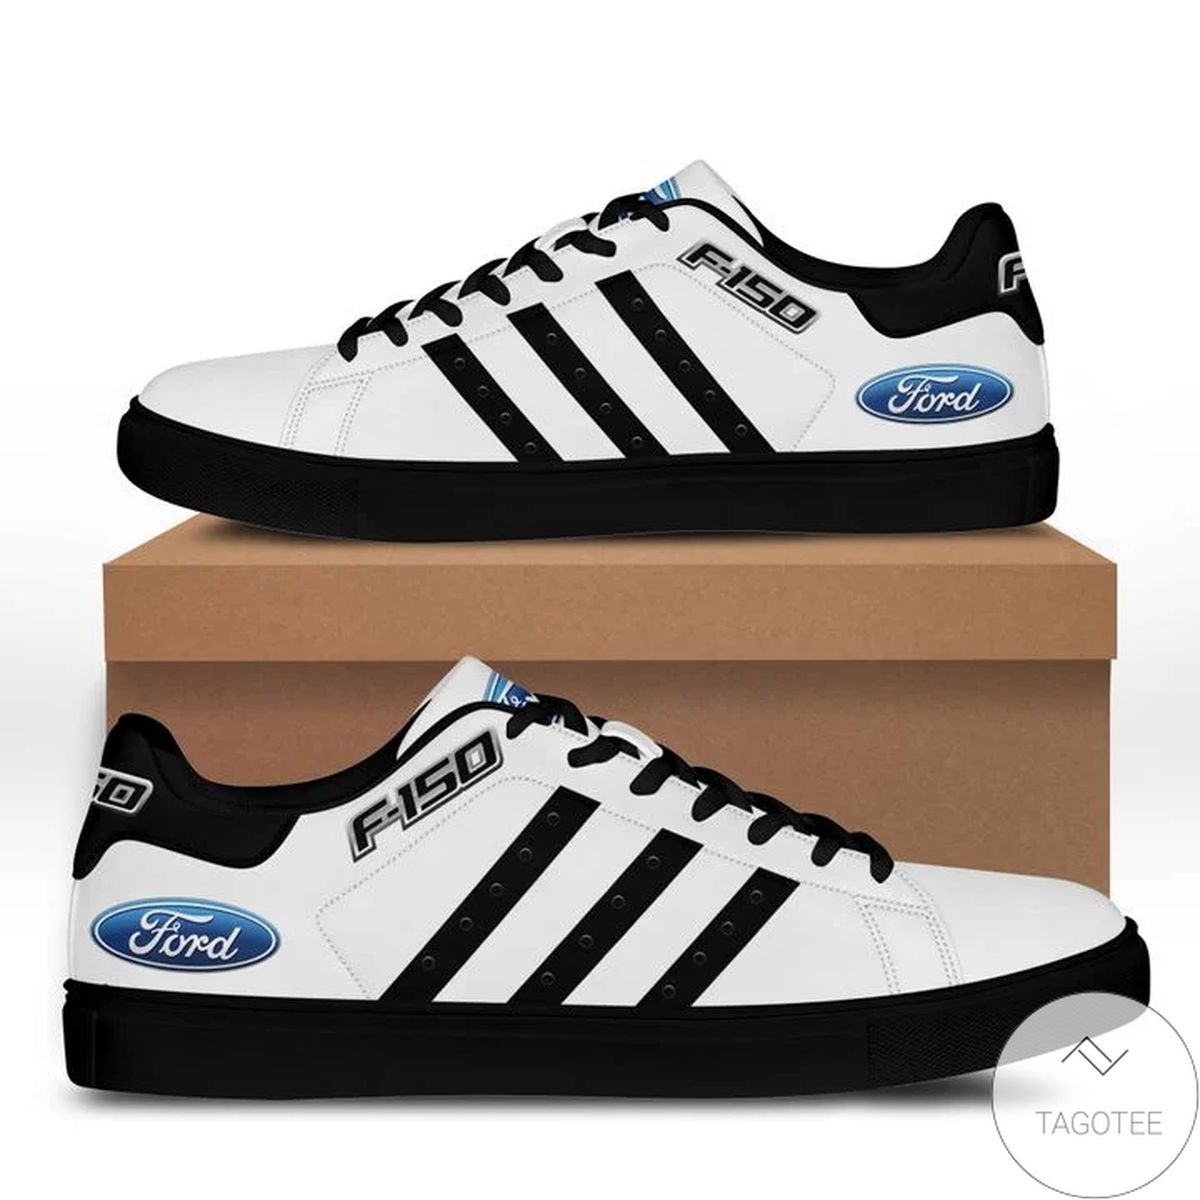 Ford F-150 Stan Smith Shoes